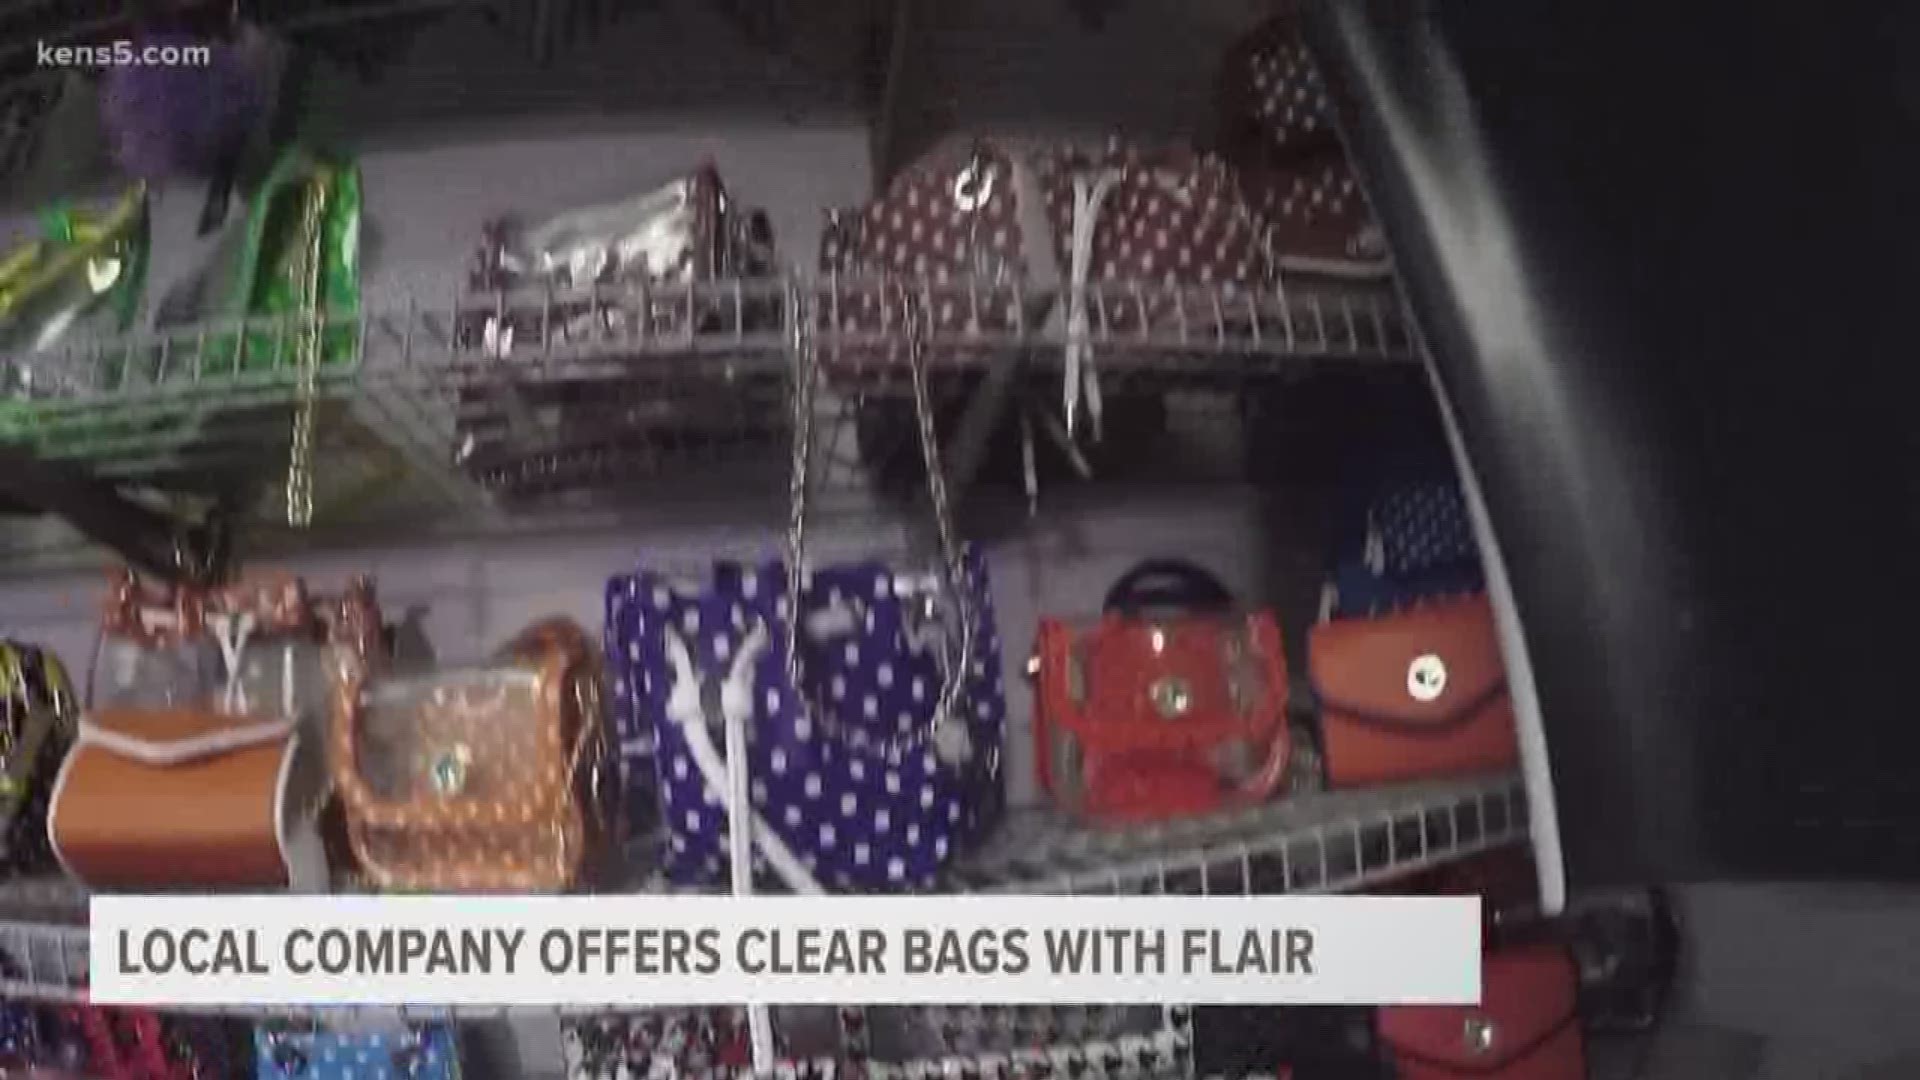 All of the Final Four activities will require visitors to carry clear bags, rather than the usual backpacks or purses. A local company offers some clear bags with designer touches.